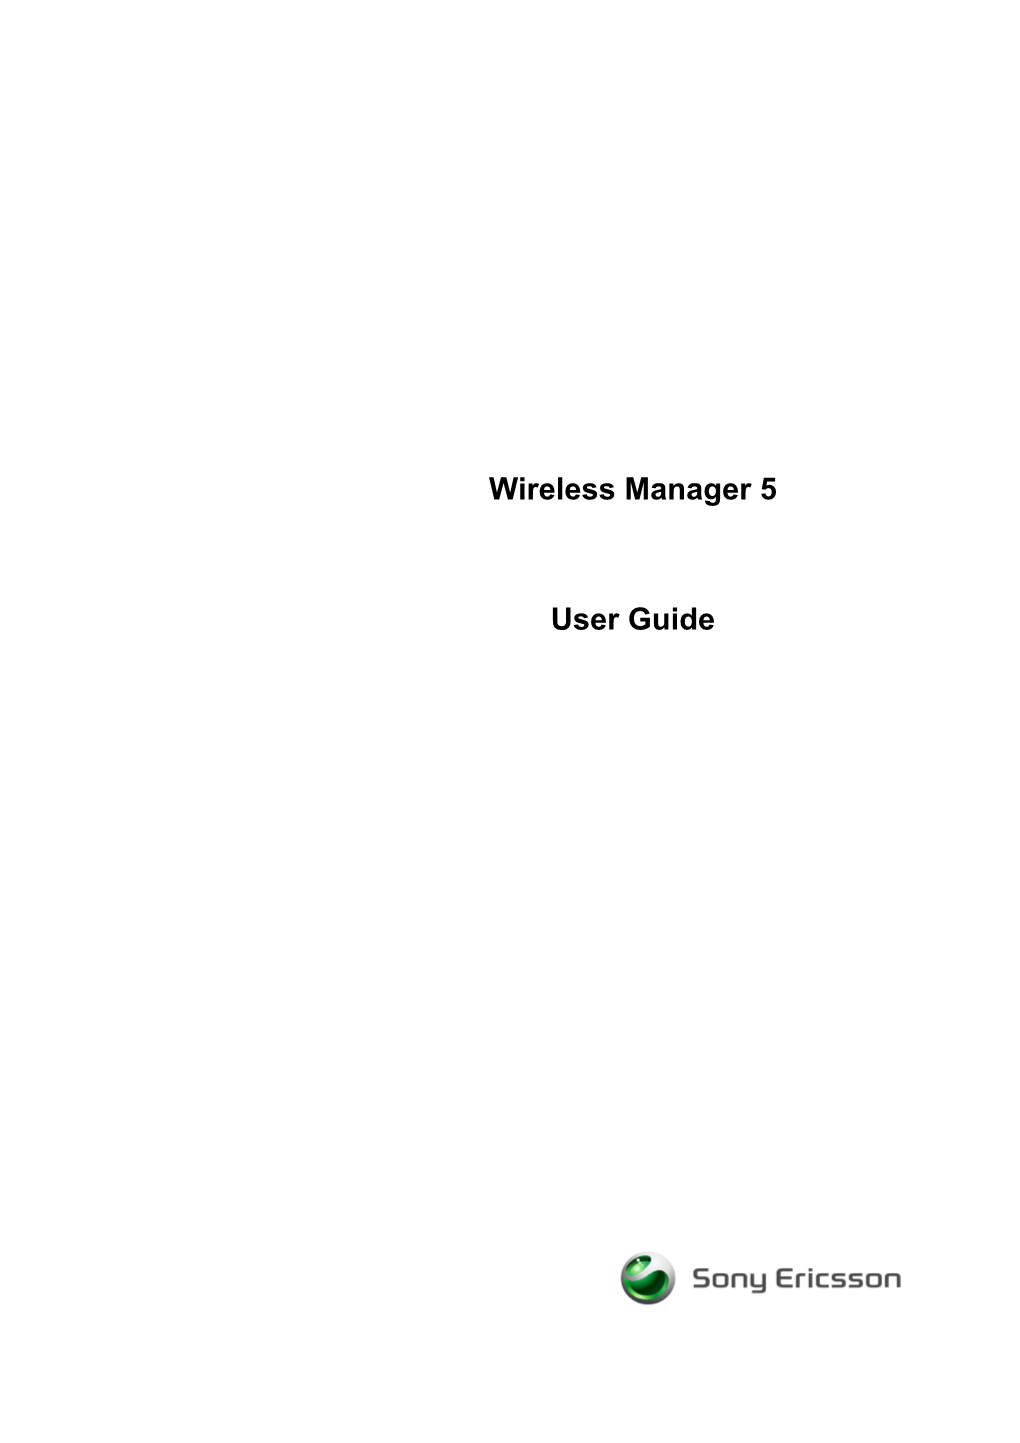 Wireless Manager 5 User Guide